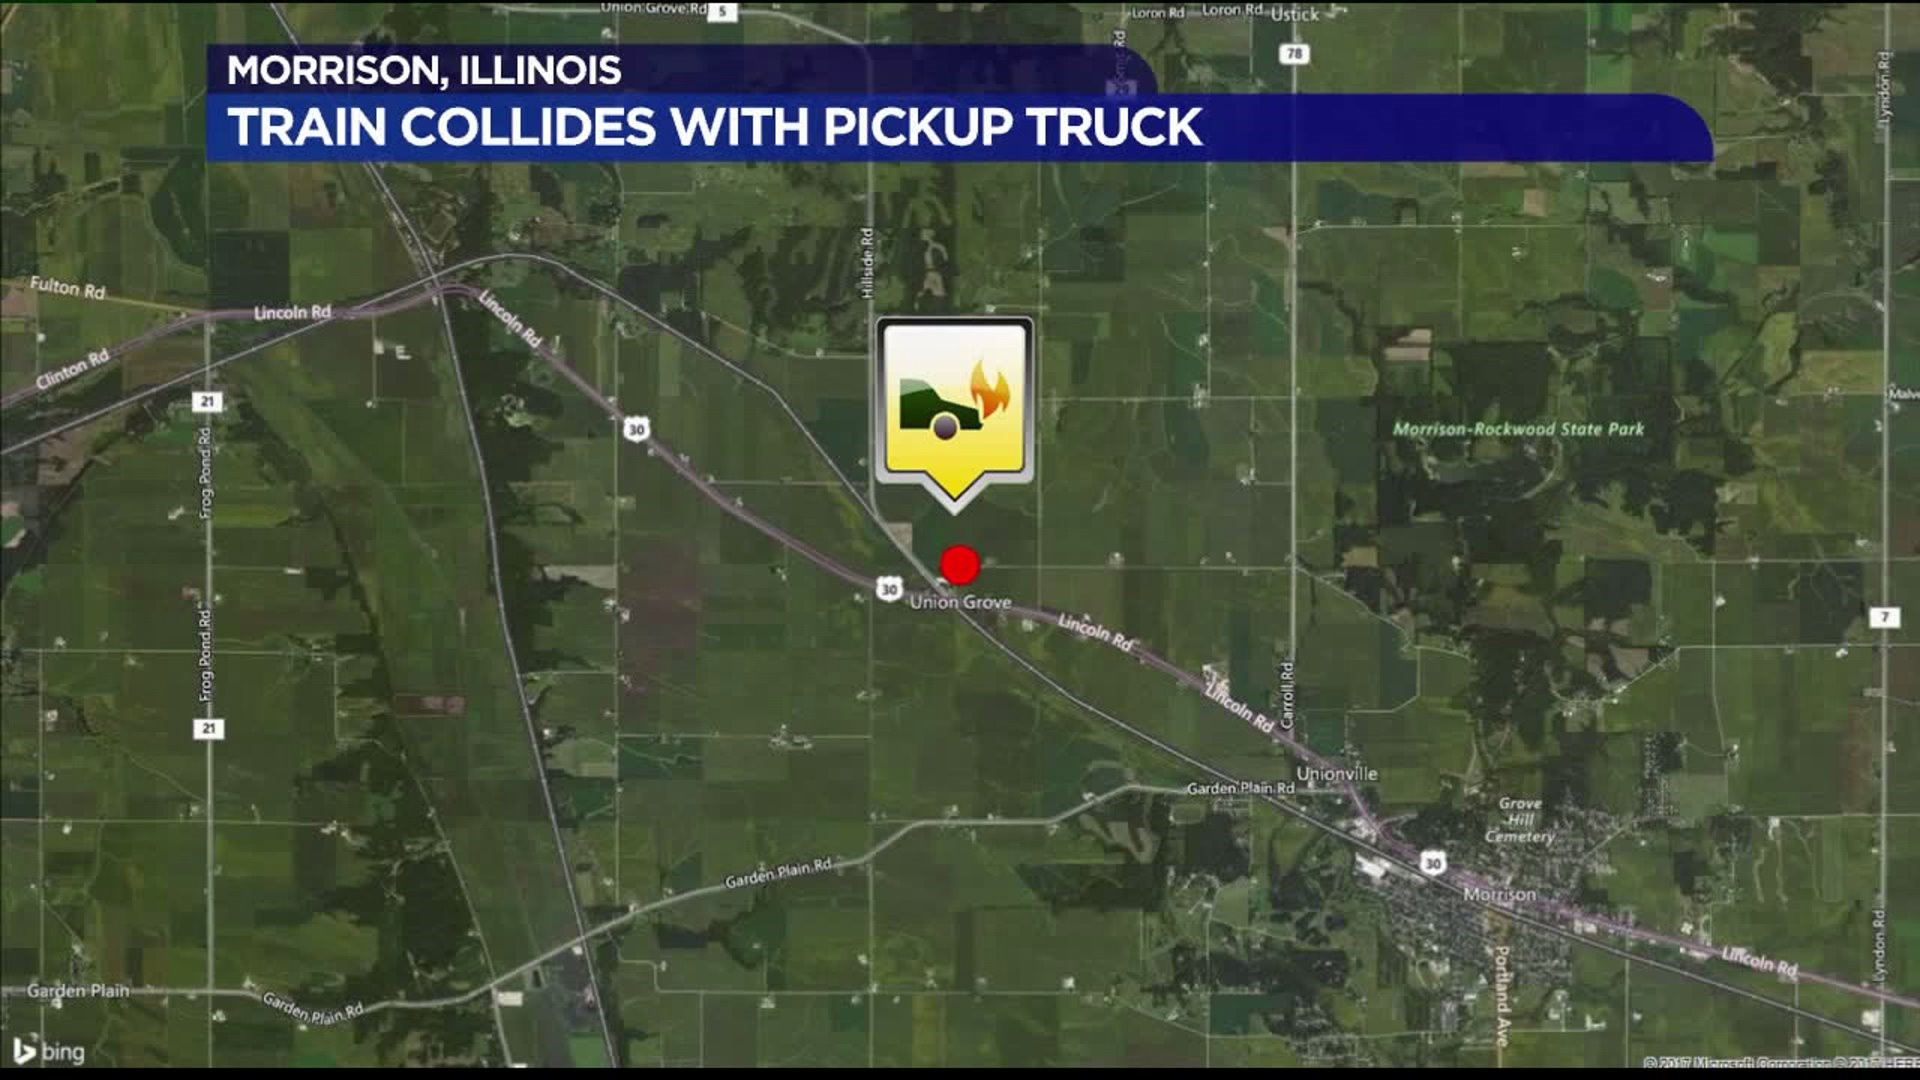 Train Collides with Pickup Truck